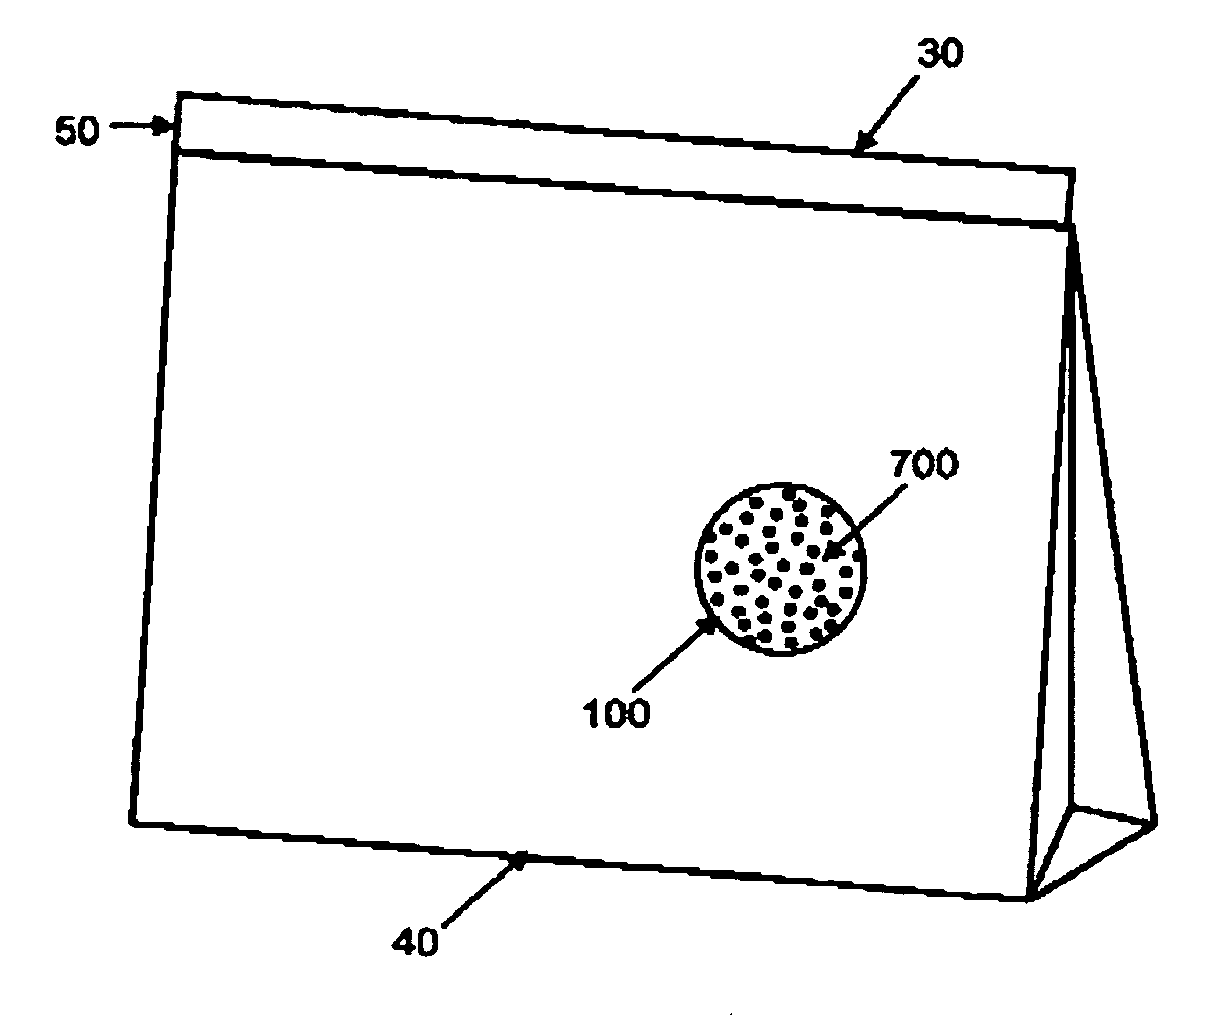 Package for granular compositions